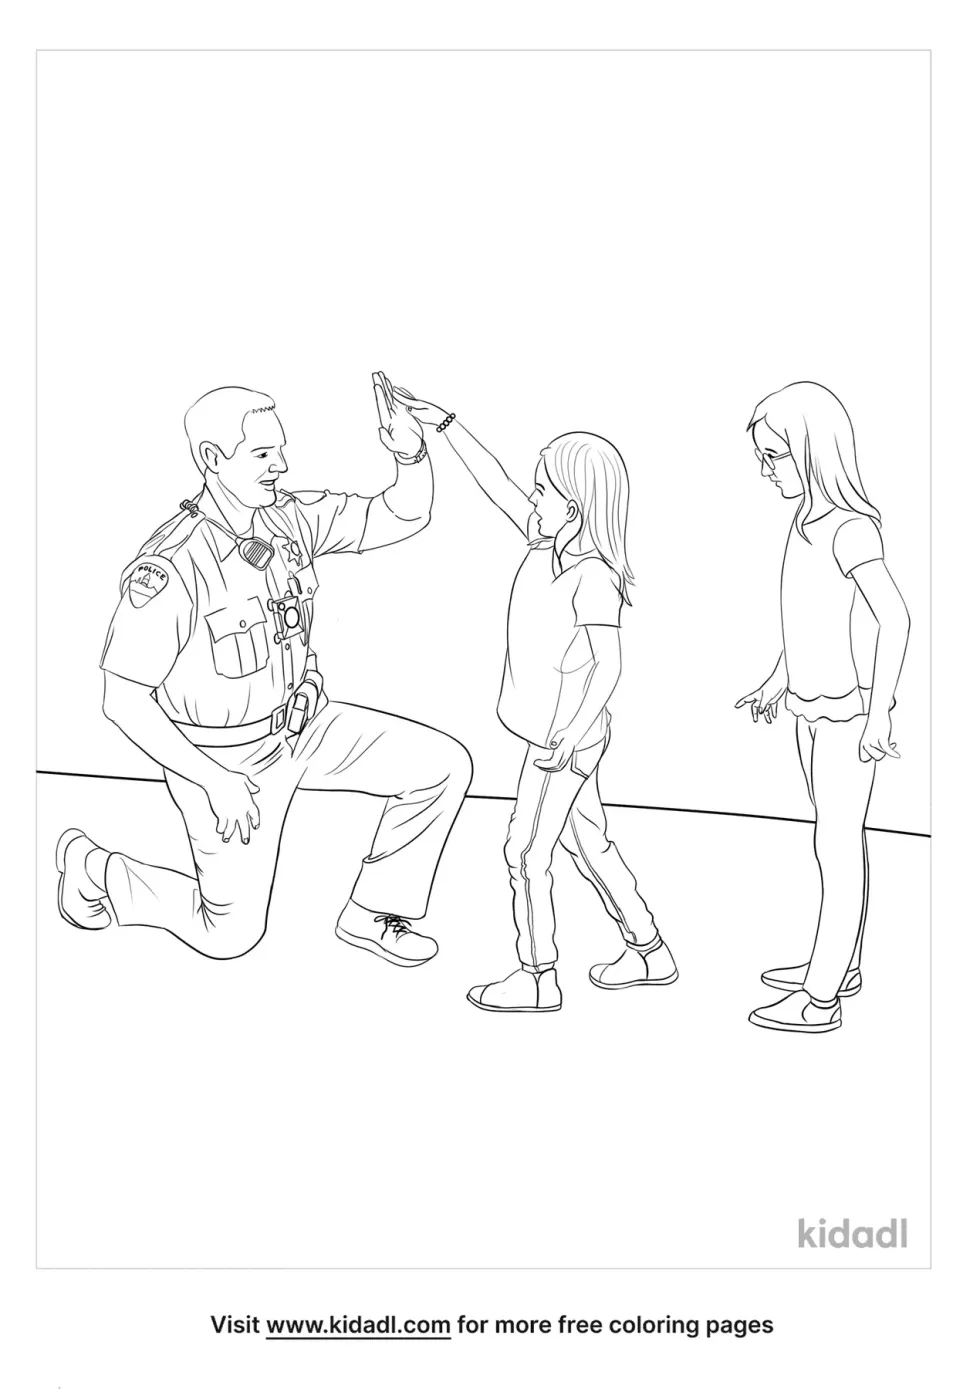 Police With Kids Coloring Page